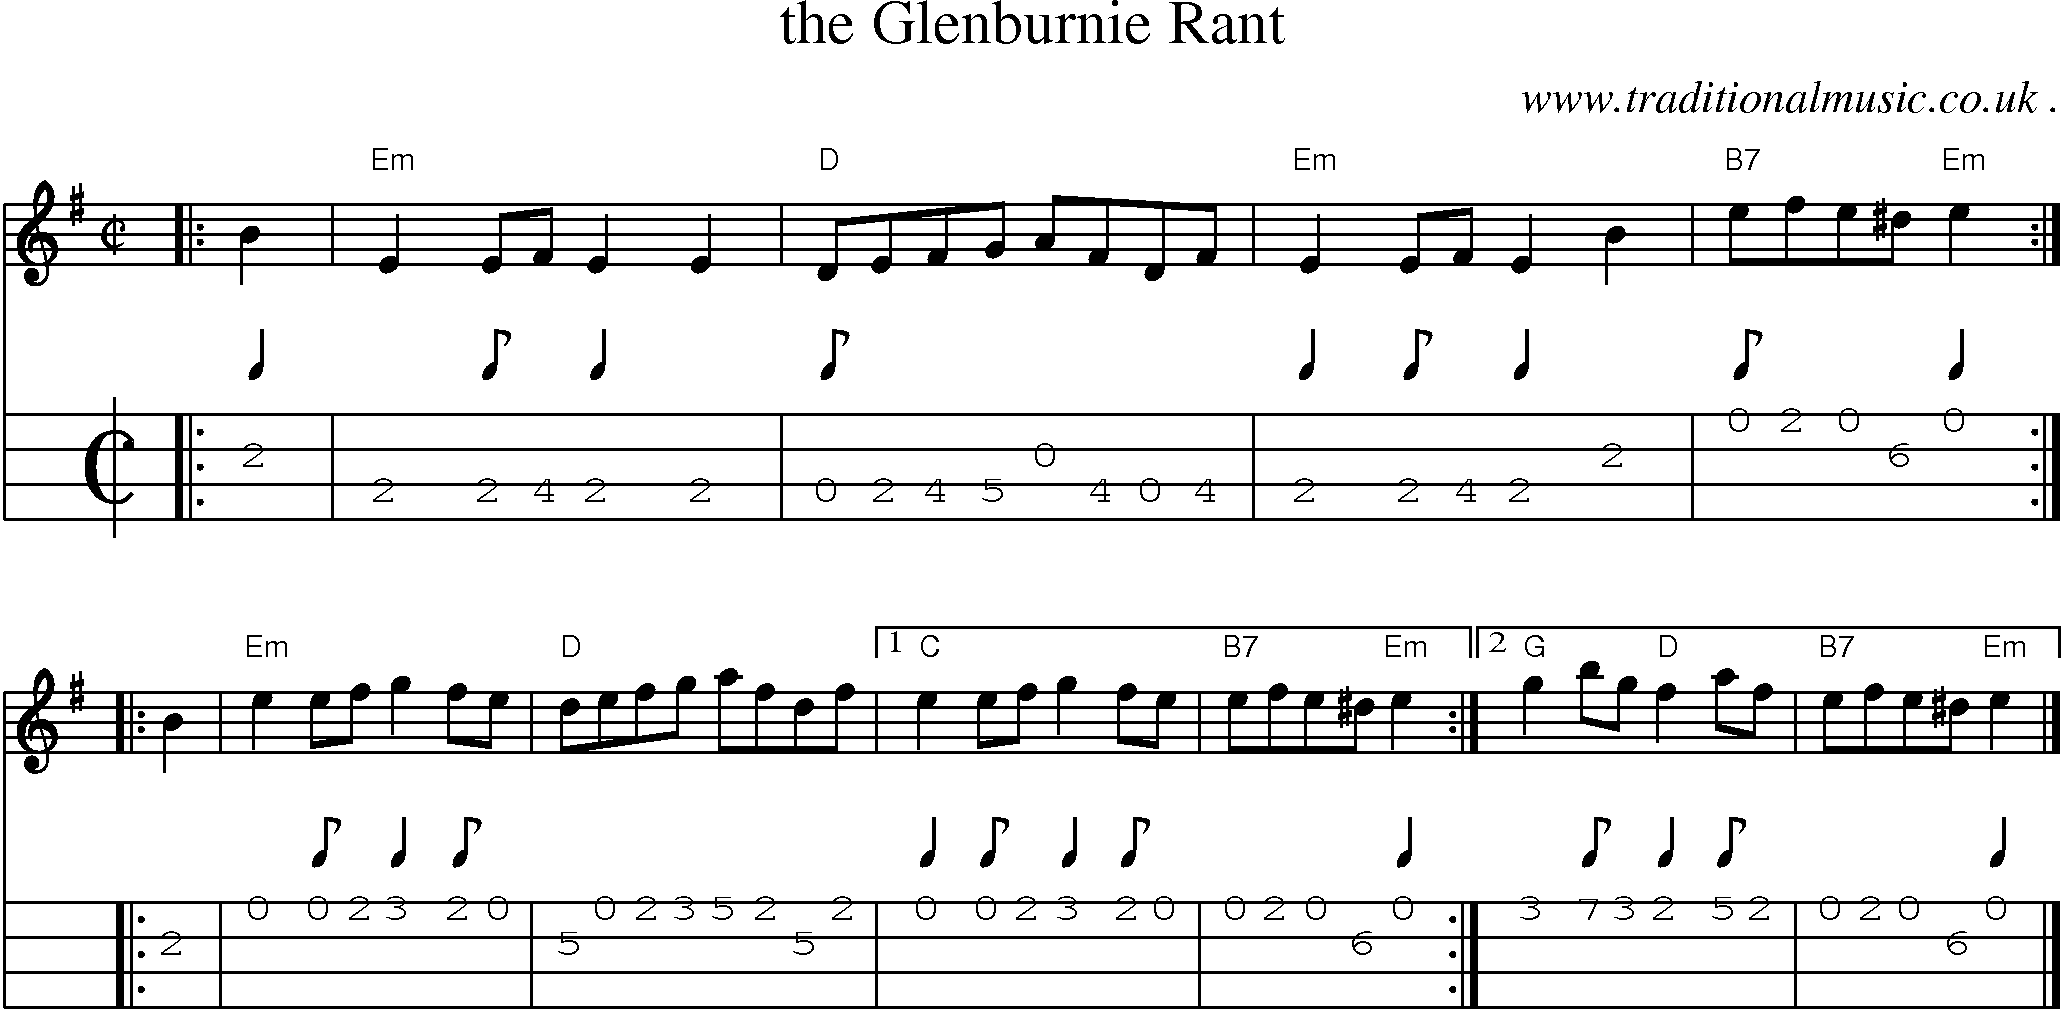 Sheet-music  score, Chords and Mandolin Tabs for The Glenburnie Rant